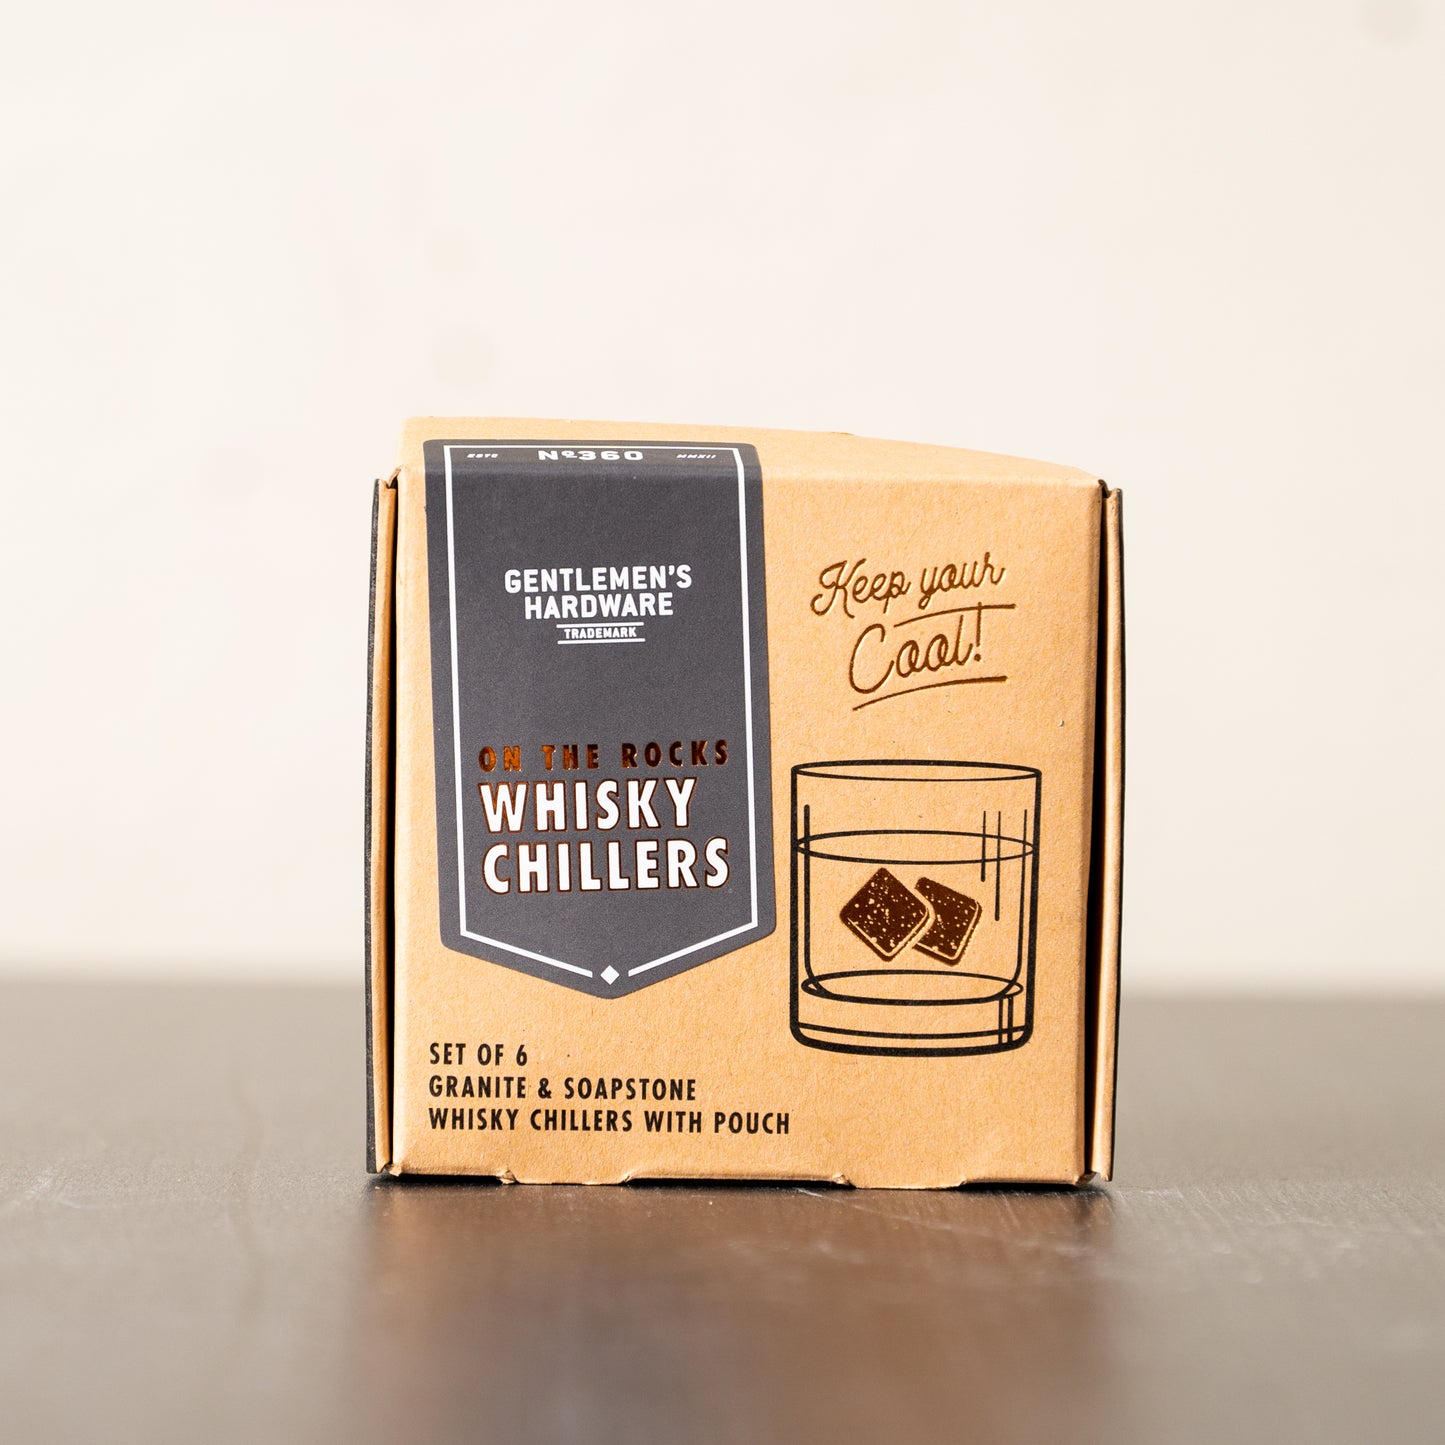 Whisky Chillers